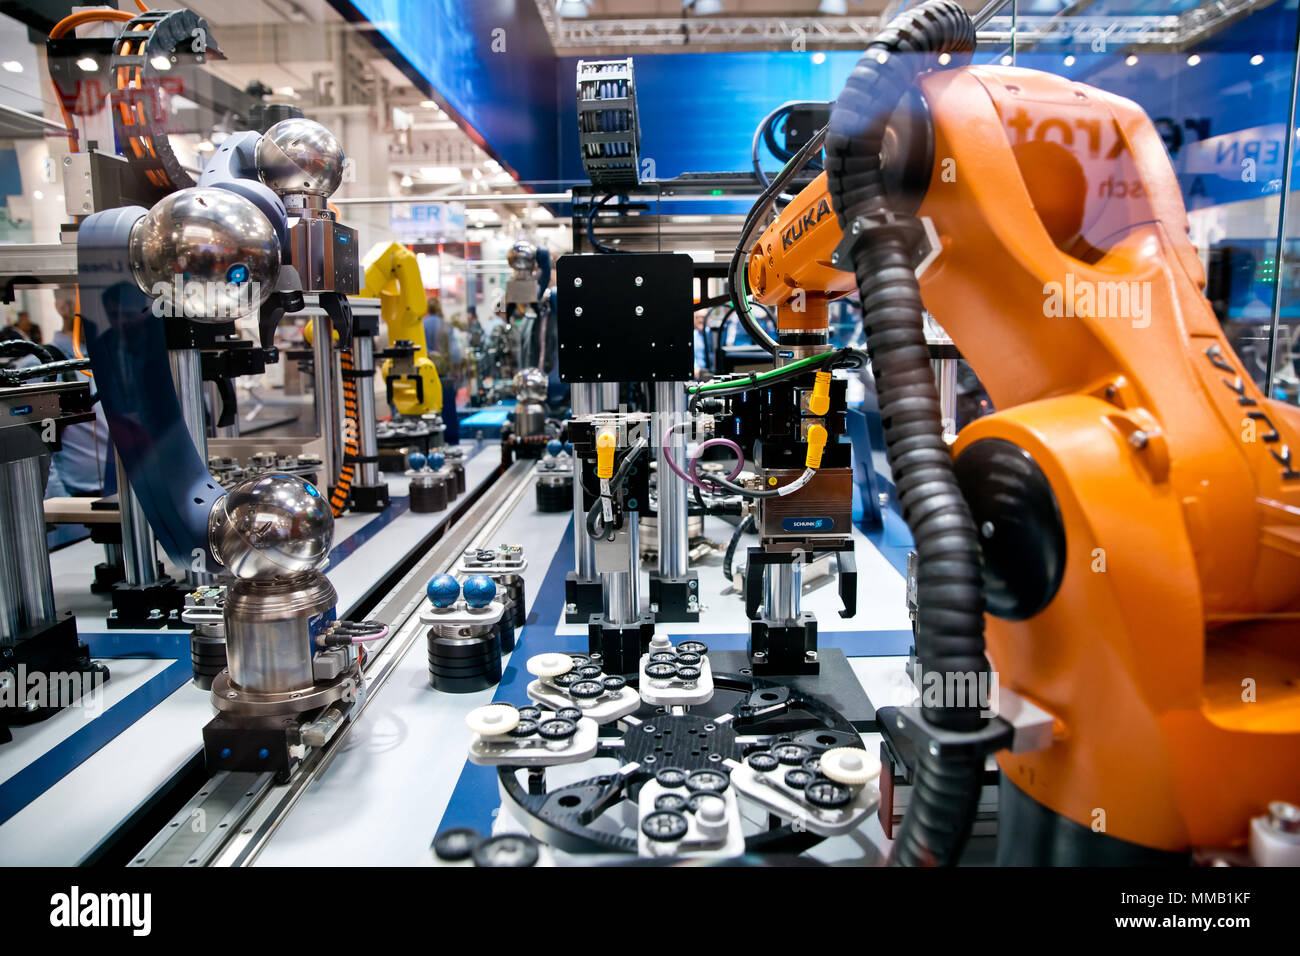 Hannover, Germany - April, 2018: Schunk assembly electronics line with robots on Messe fair in Hannover, Germany Stock Photo